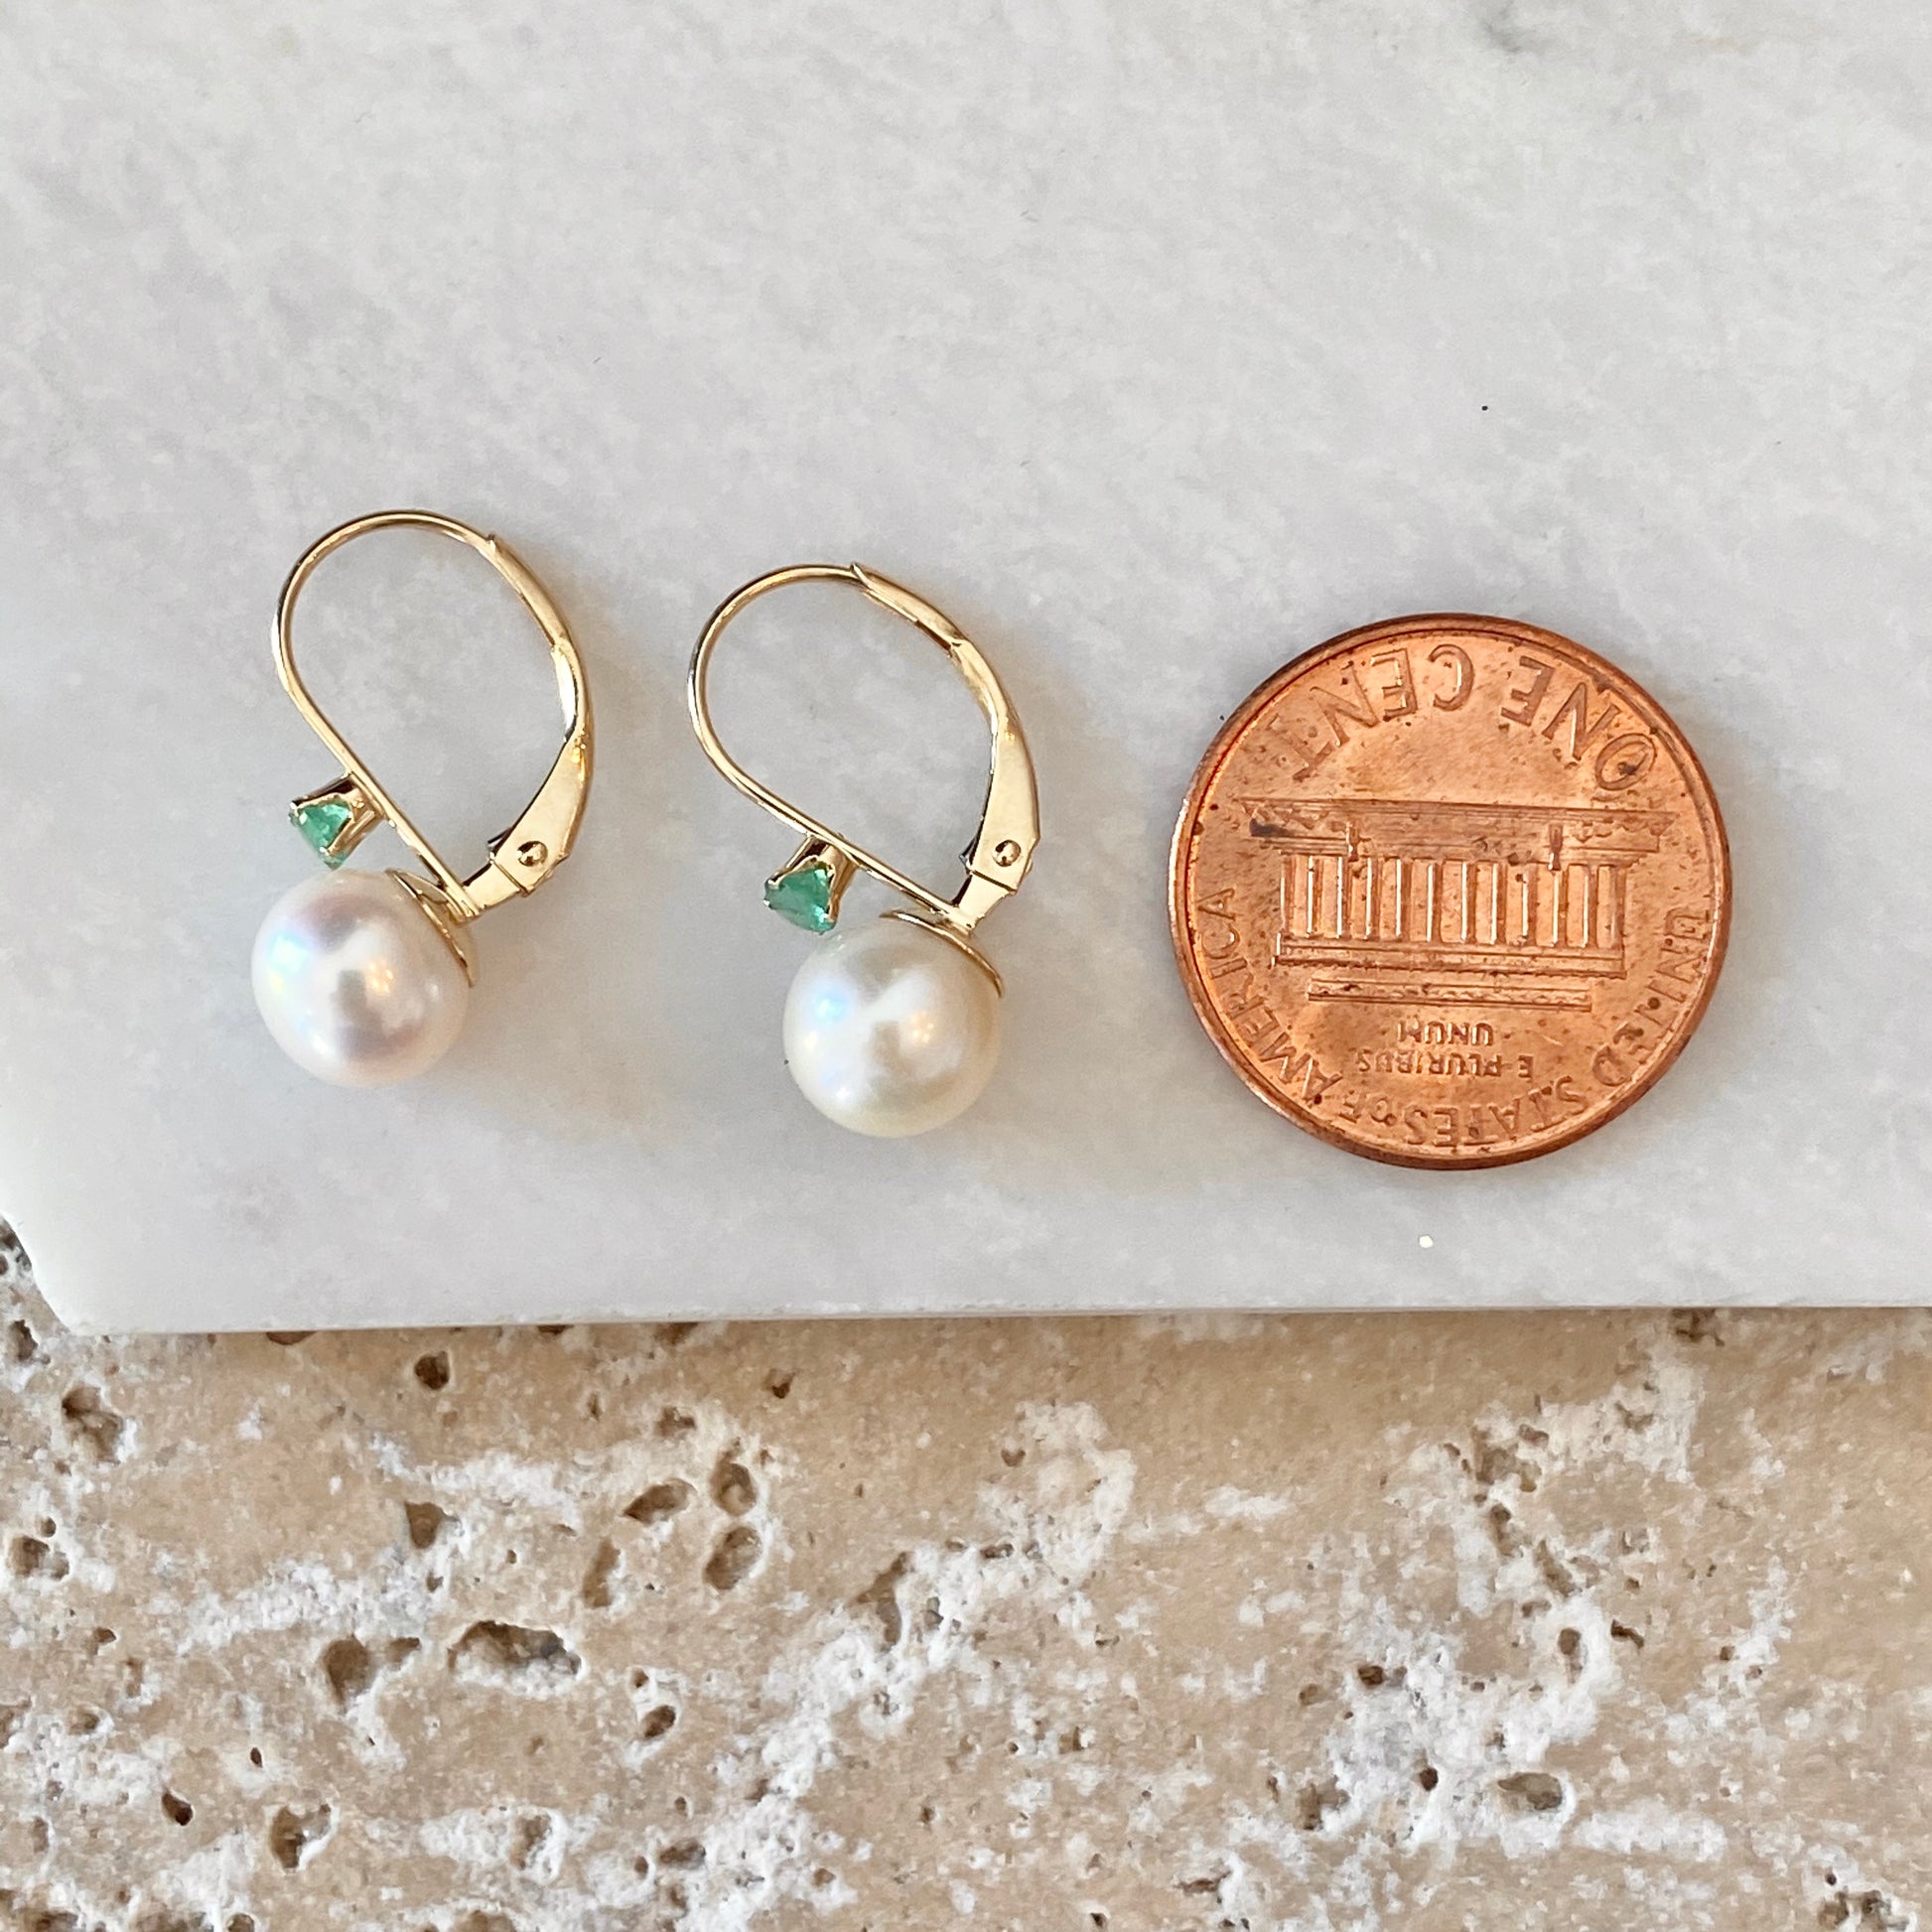 14KT Yellow Gold Emerald + Freshwater Pearl Lever Back Earrings, 14KT Yellow Gold Emerald + Freshwater Pearl Lever Back Earrings - Legacy Saint Jewelry